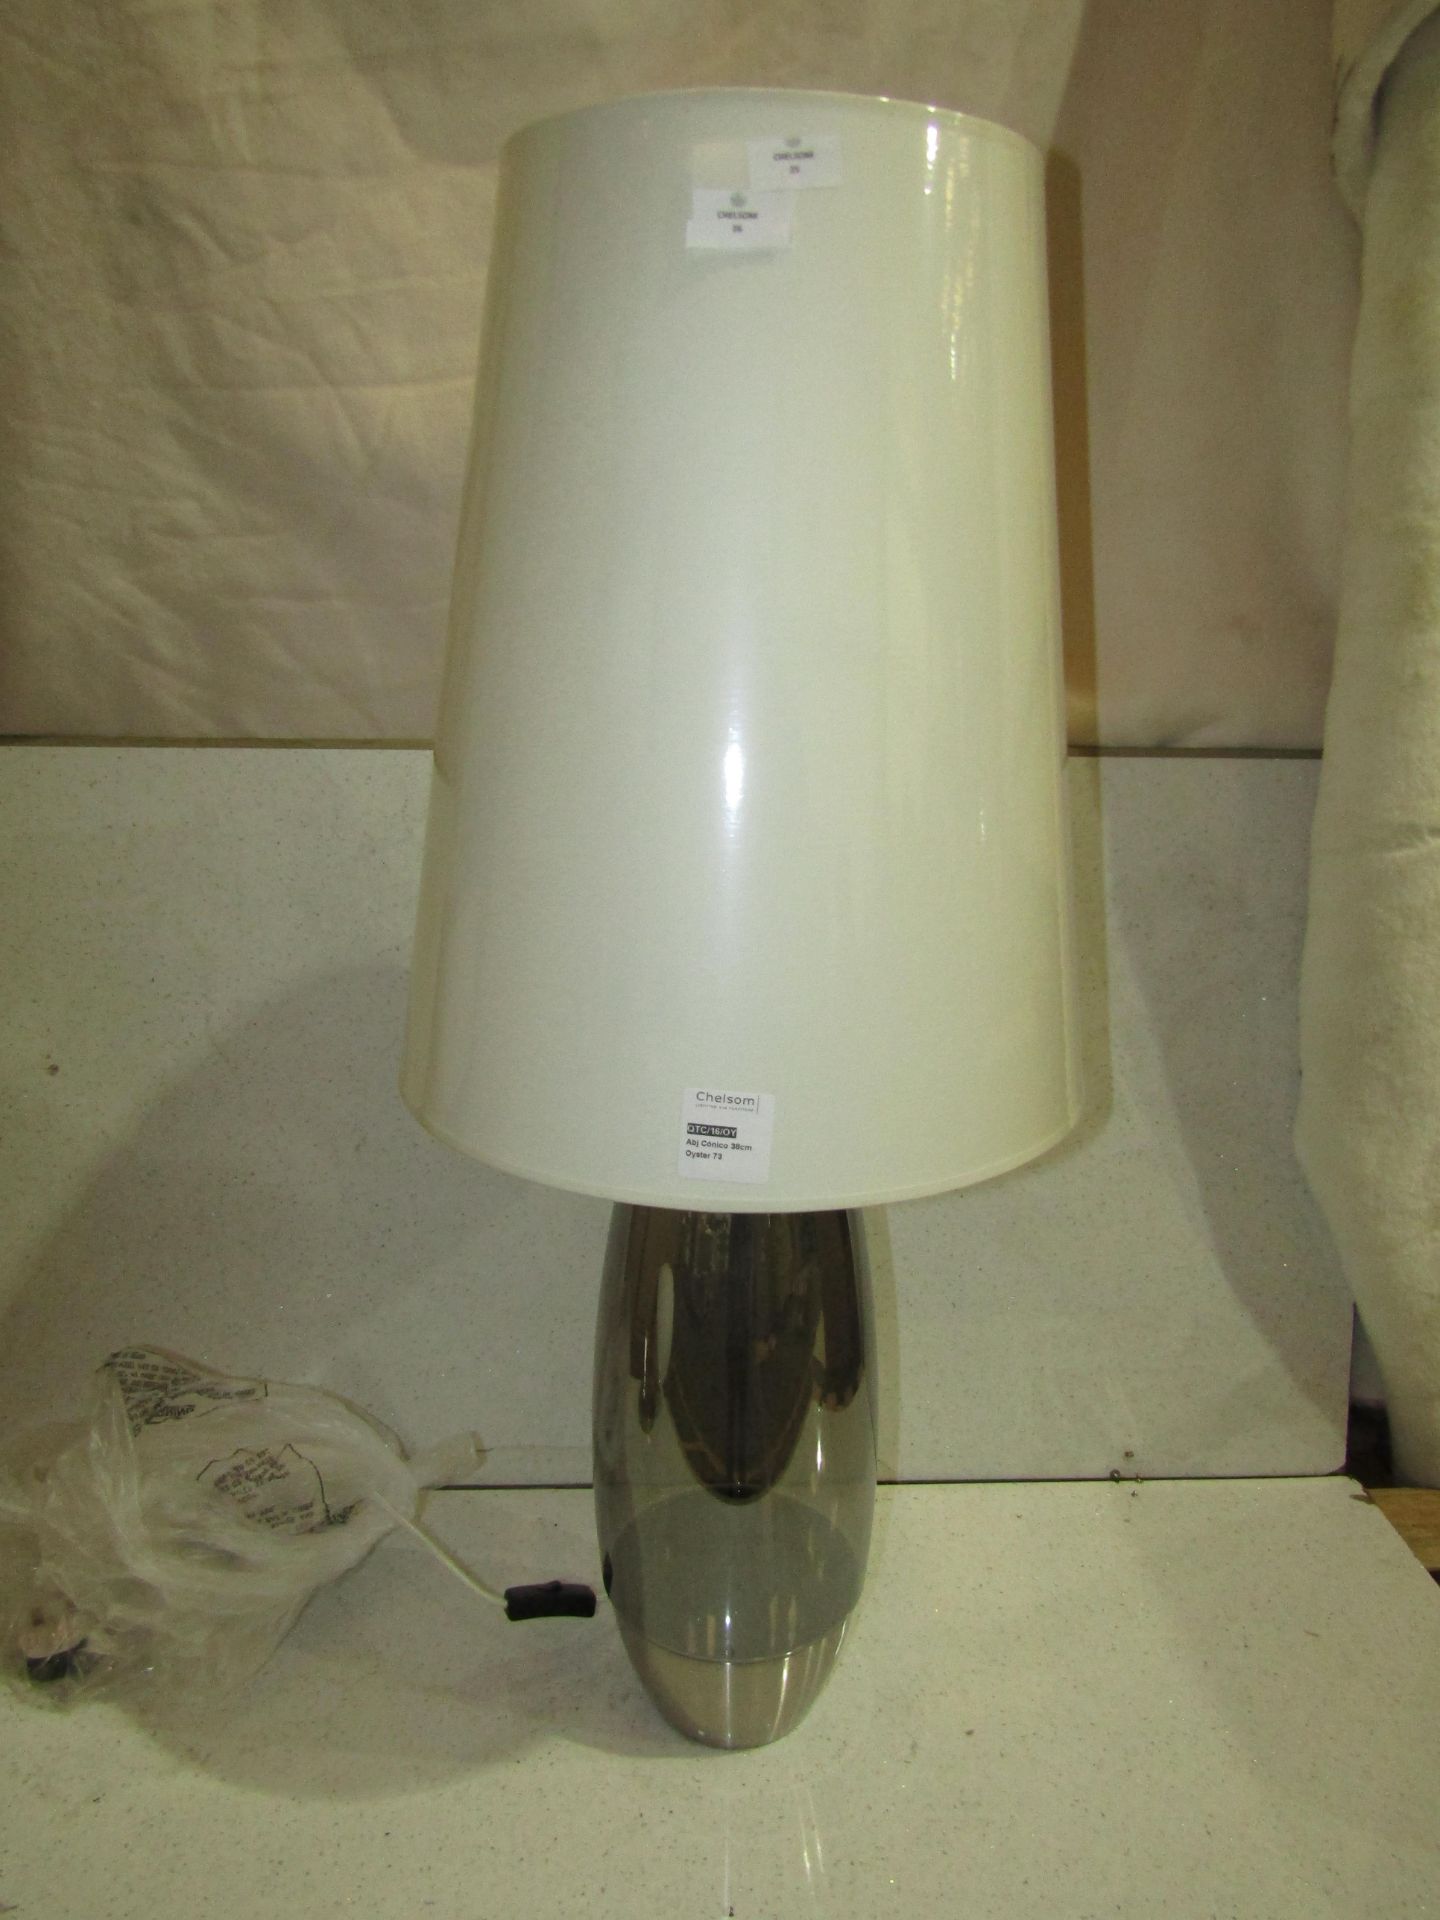 Pair of 2 Chelsom - Stockholm Table Lamp With Oyster 38cm Shade - SK/26/BN - New & Boxed.